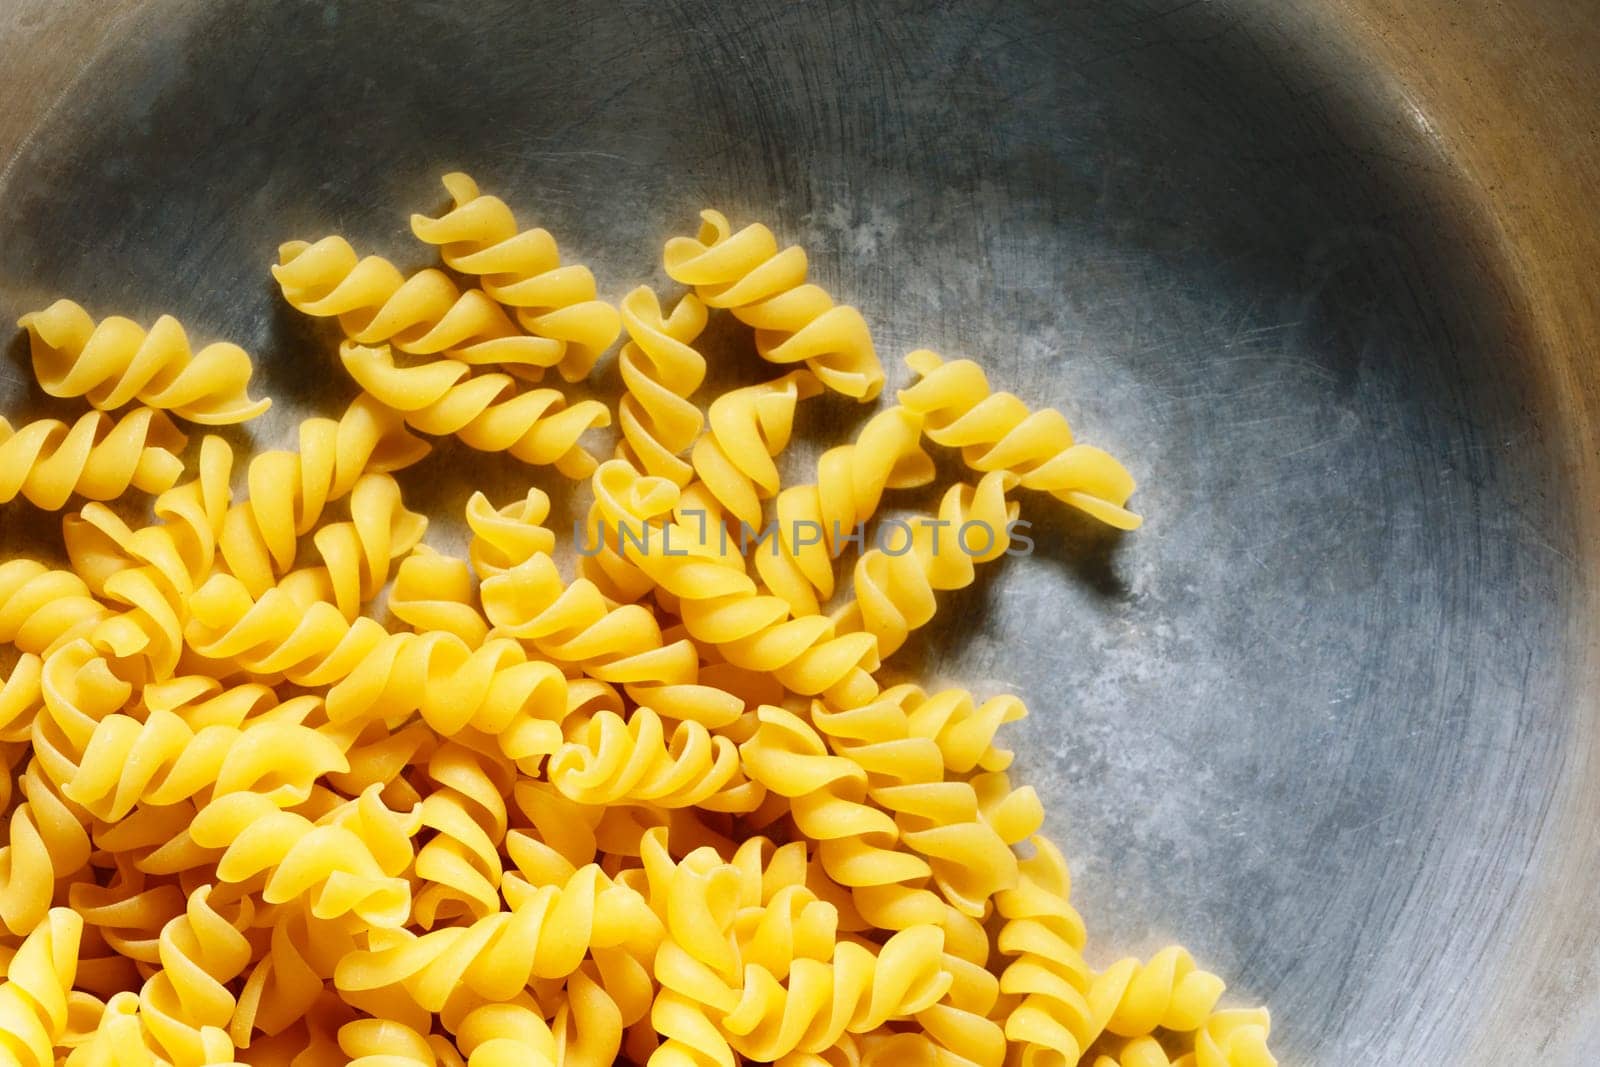  Overhead view of bowl of uncooked fusilli pasta  , helicoidal shape pasta